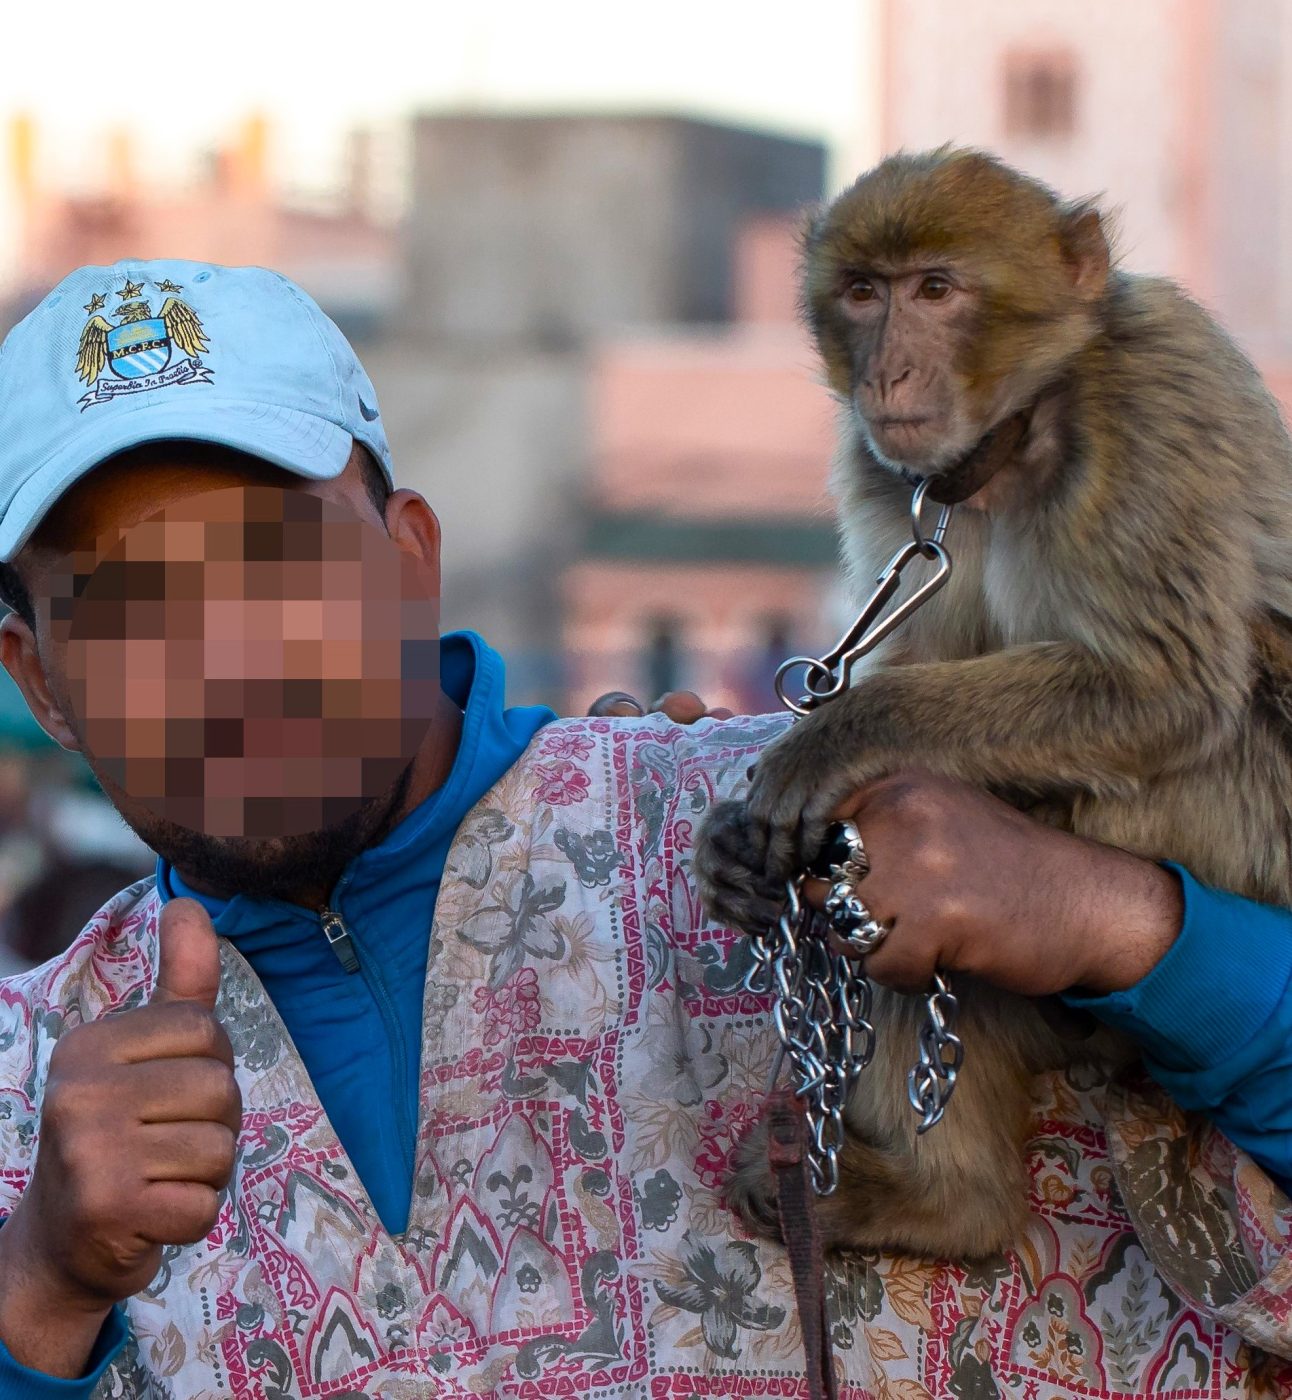 A macaque sits on the shoulder of a man posing for a photo with a chain around its neck